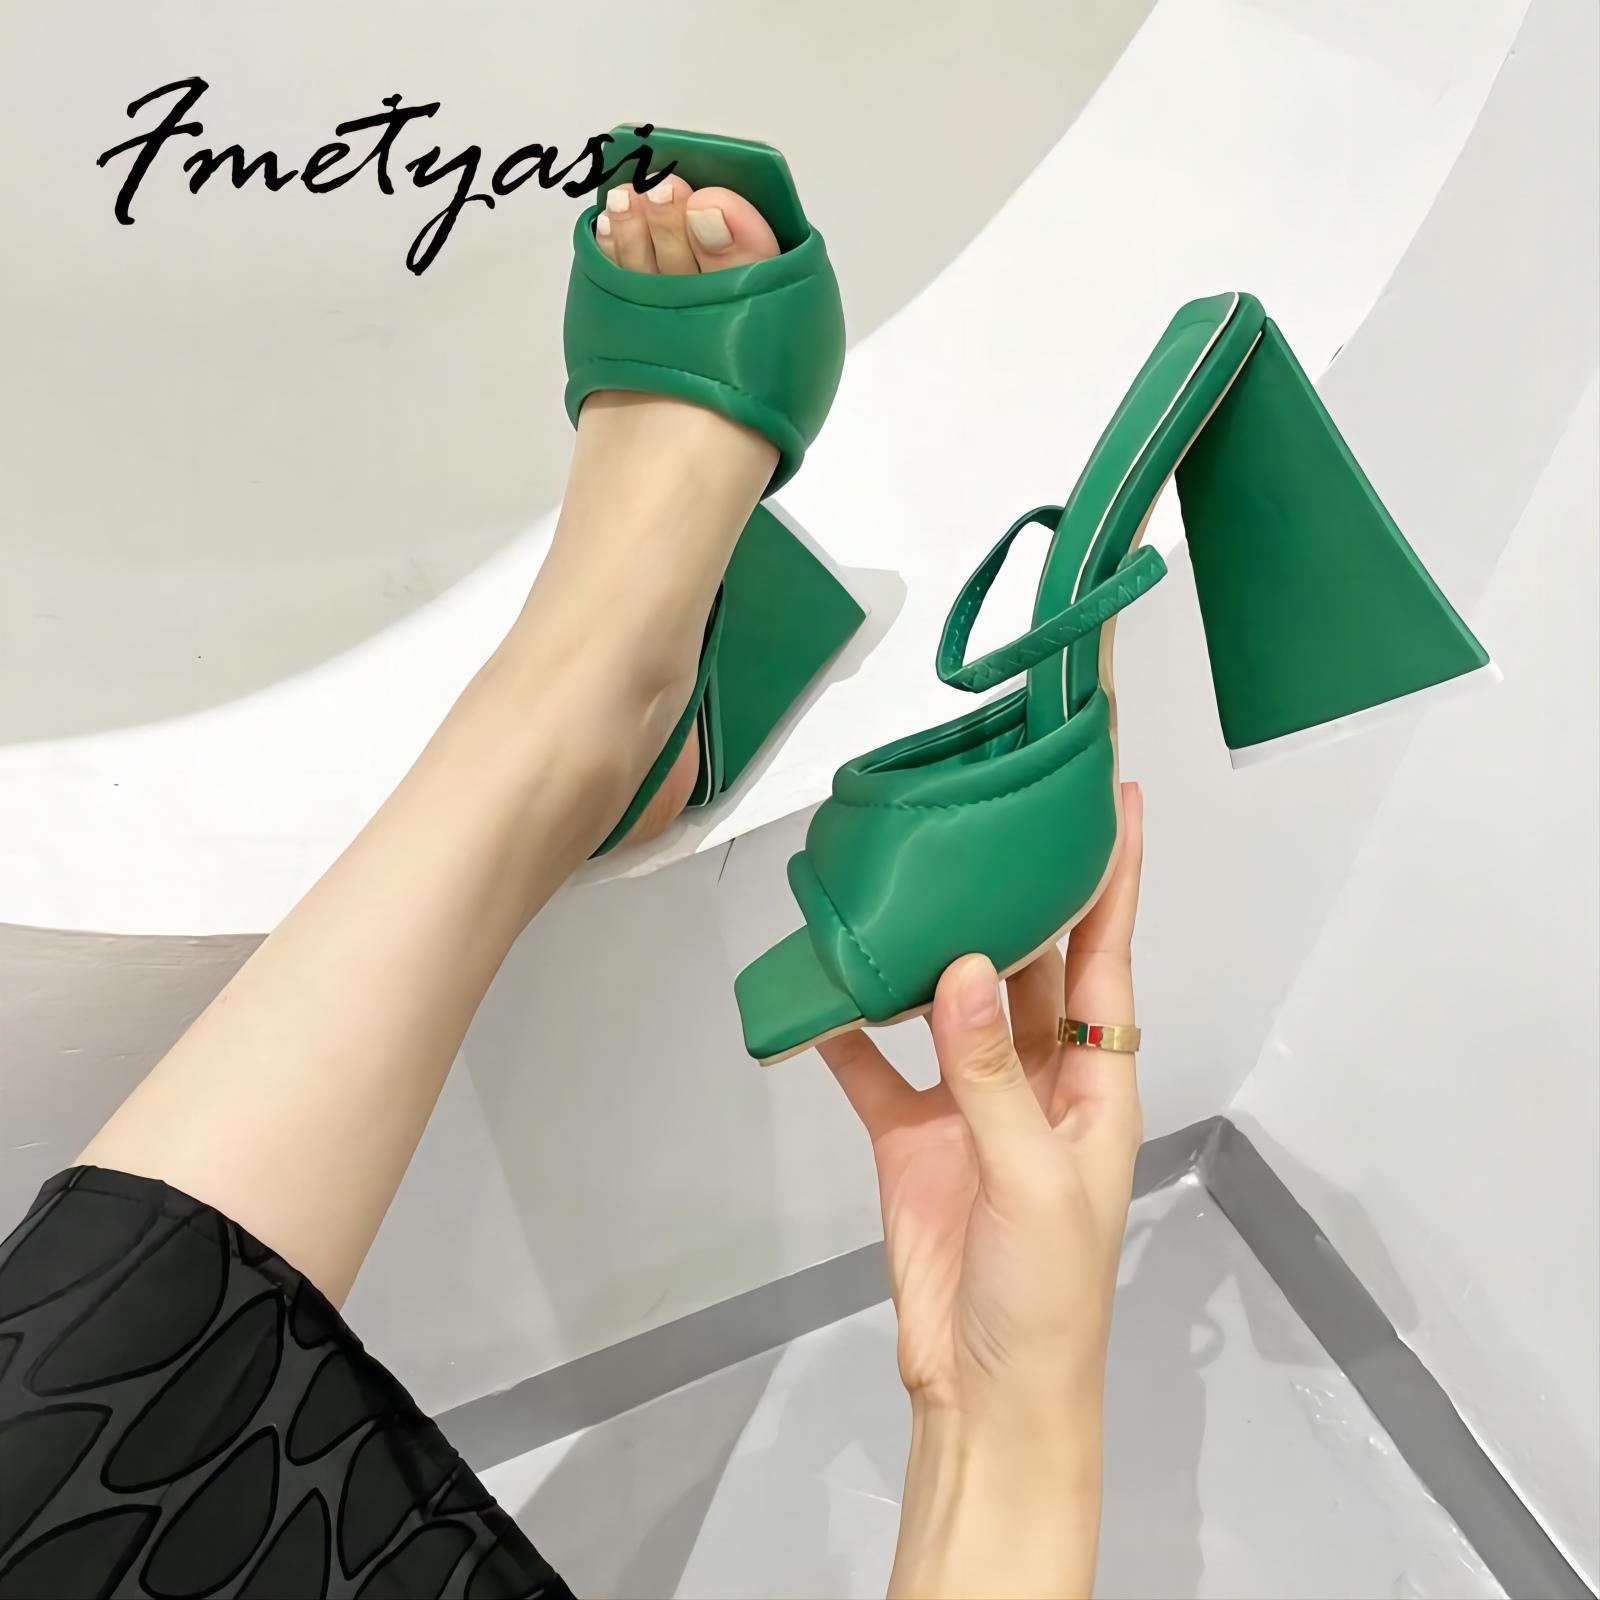 Runway Triangle Women Sandals Fashion Comfortable Satin Soft Padded Sexy Square Toe High Heel Peep Toe Party Dress Shoes 35-41